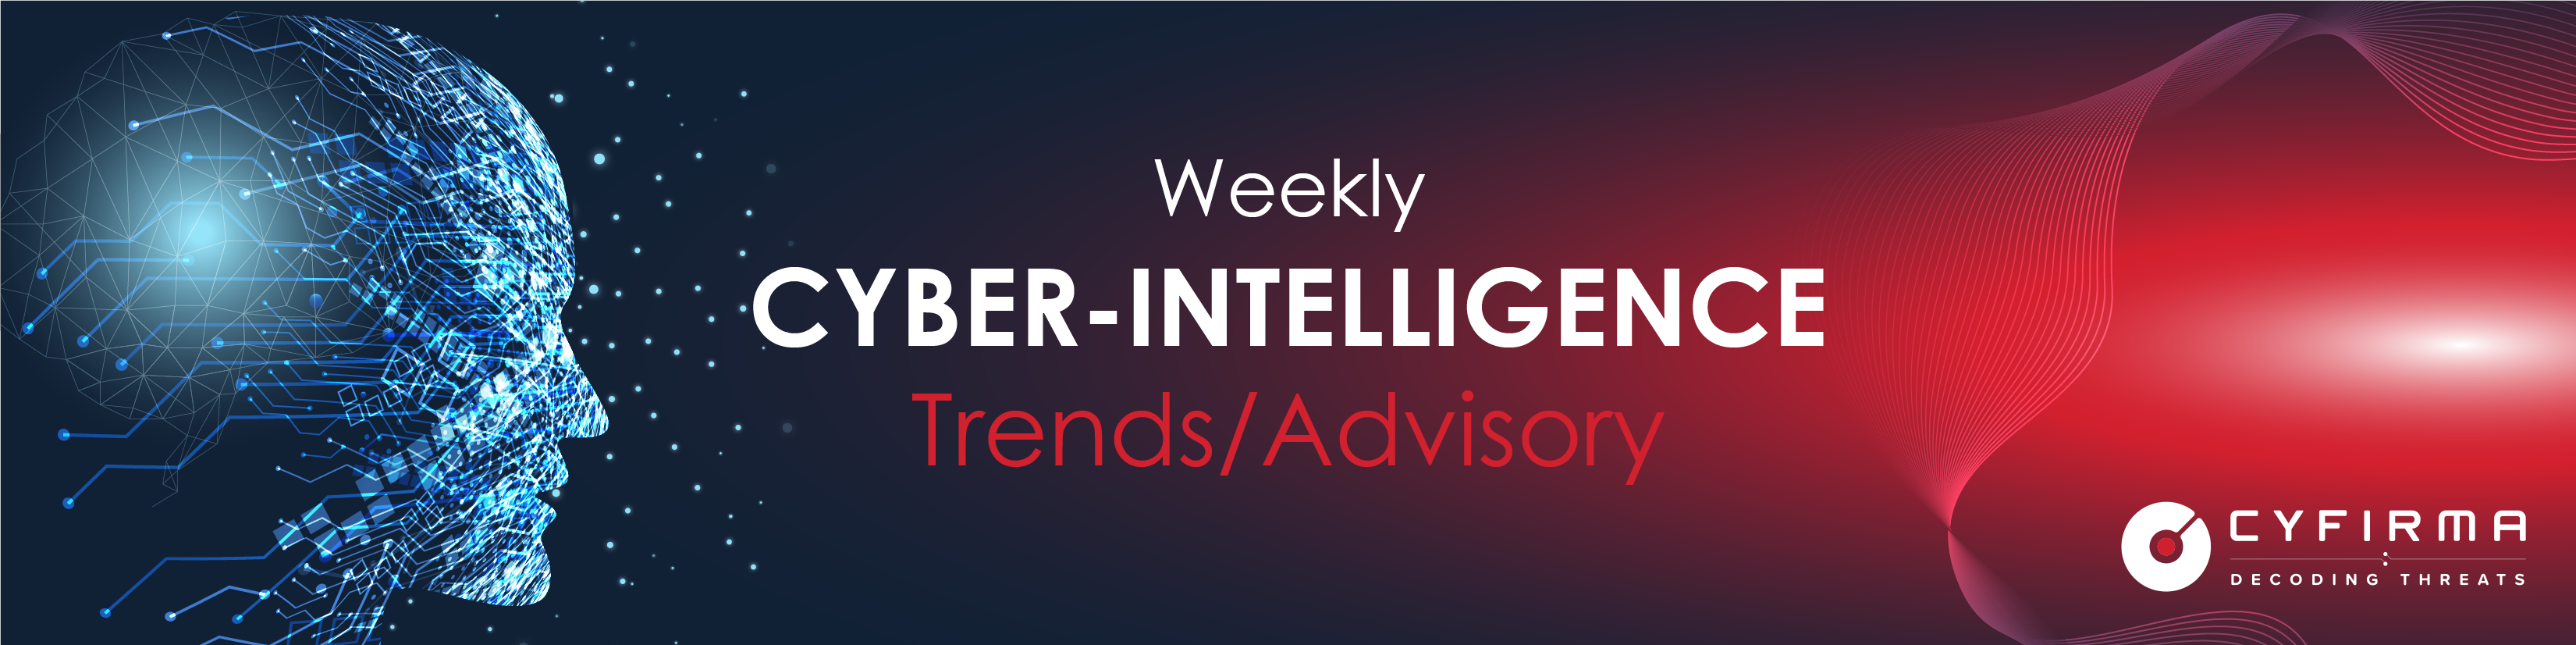 Weekly Cyber-Intelligence Trends and Advisory – 12 Feb 2022